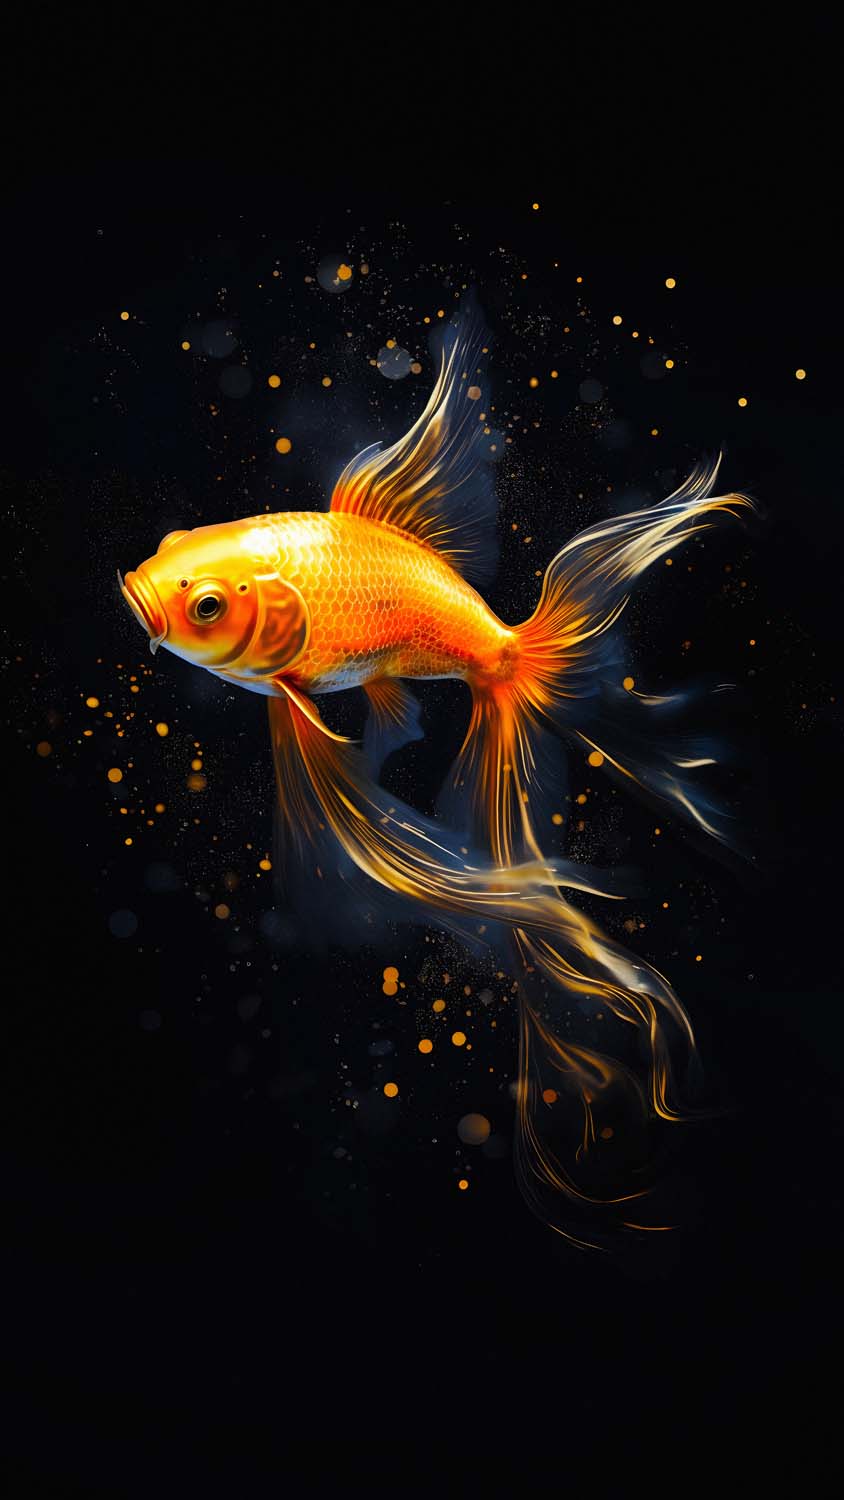 Buy Avikalp AWI3173 Underwater Fish Fishes Goldfish Full Hd 3D Look Scenery  Wallpaper for Walls 365cm x 304cm Online at Low Prices in India   Amazonin